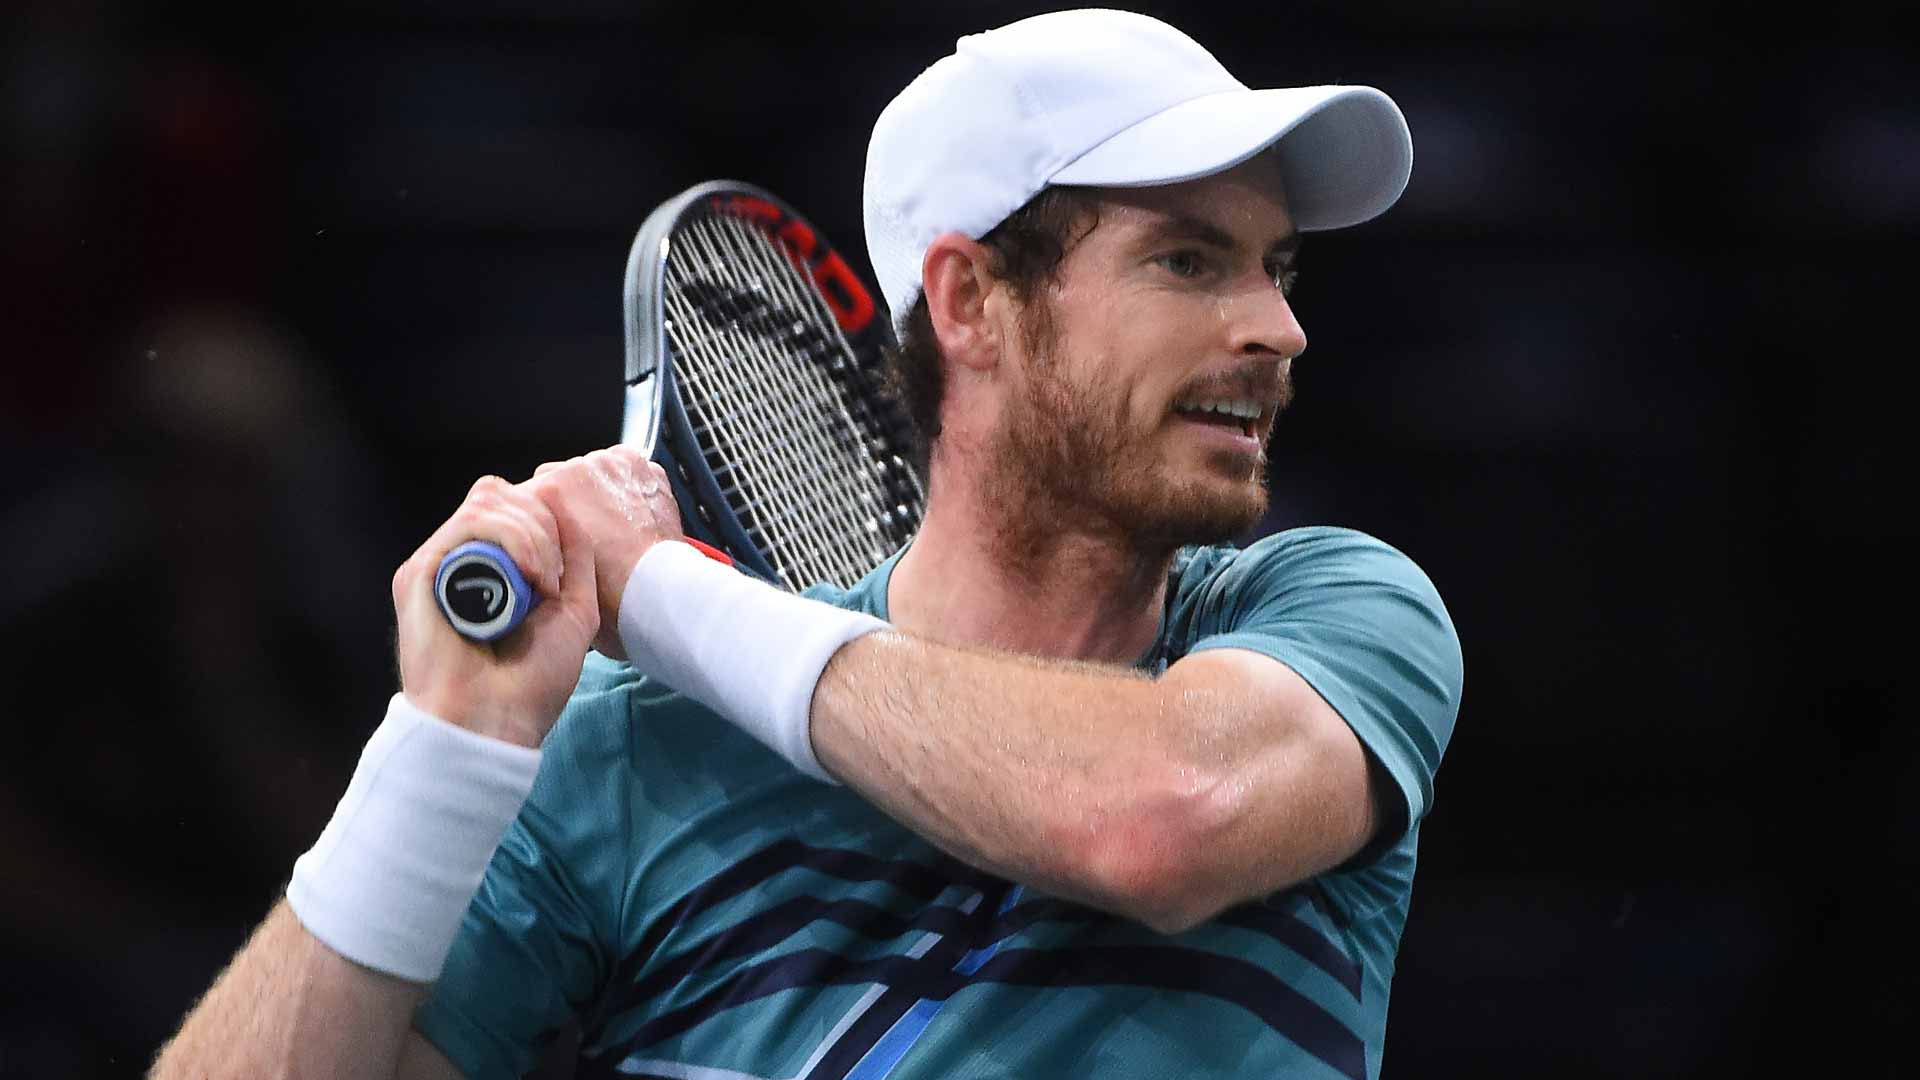 Australian Open 2022: Andy Murray to play in Sydney International to warm up for Australian Open